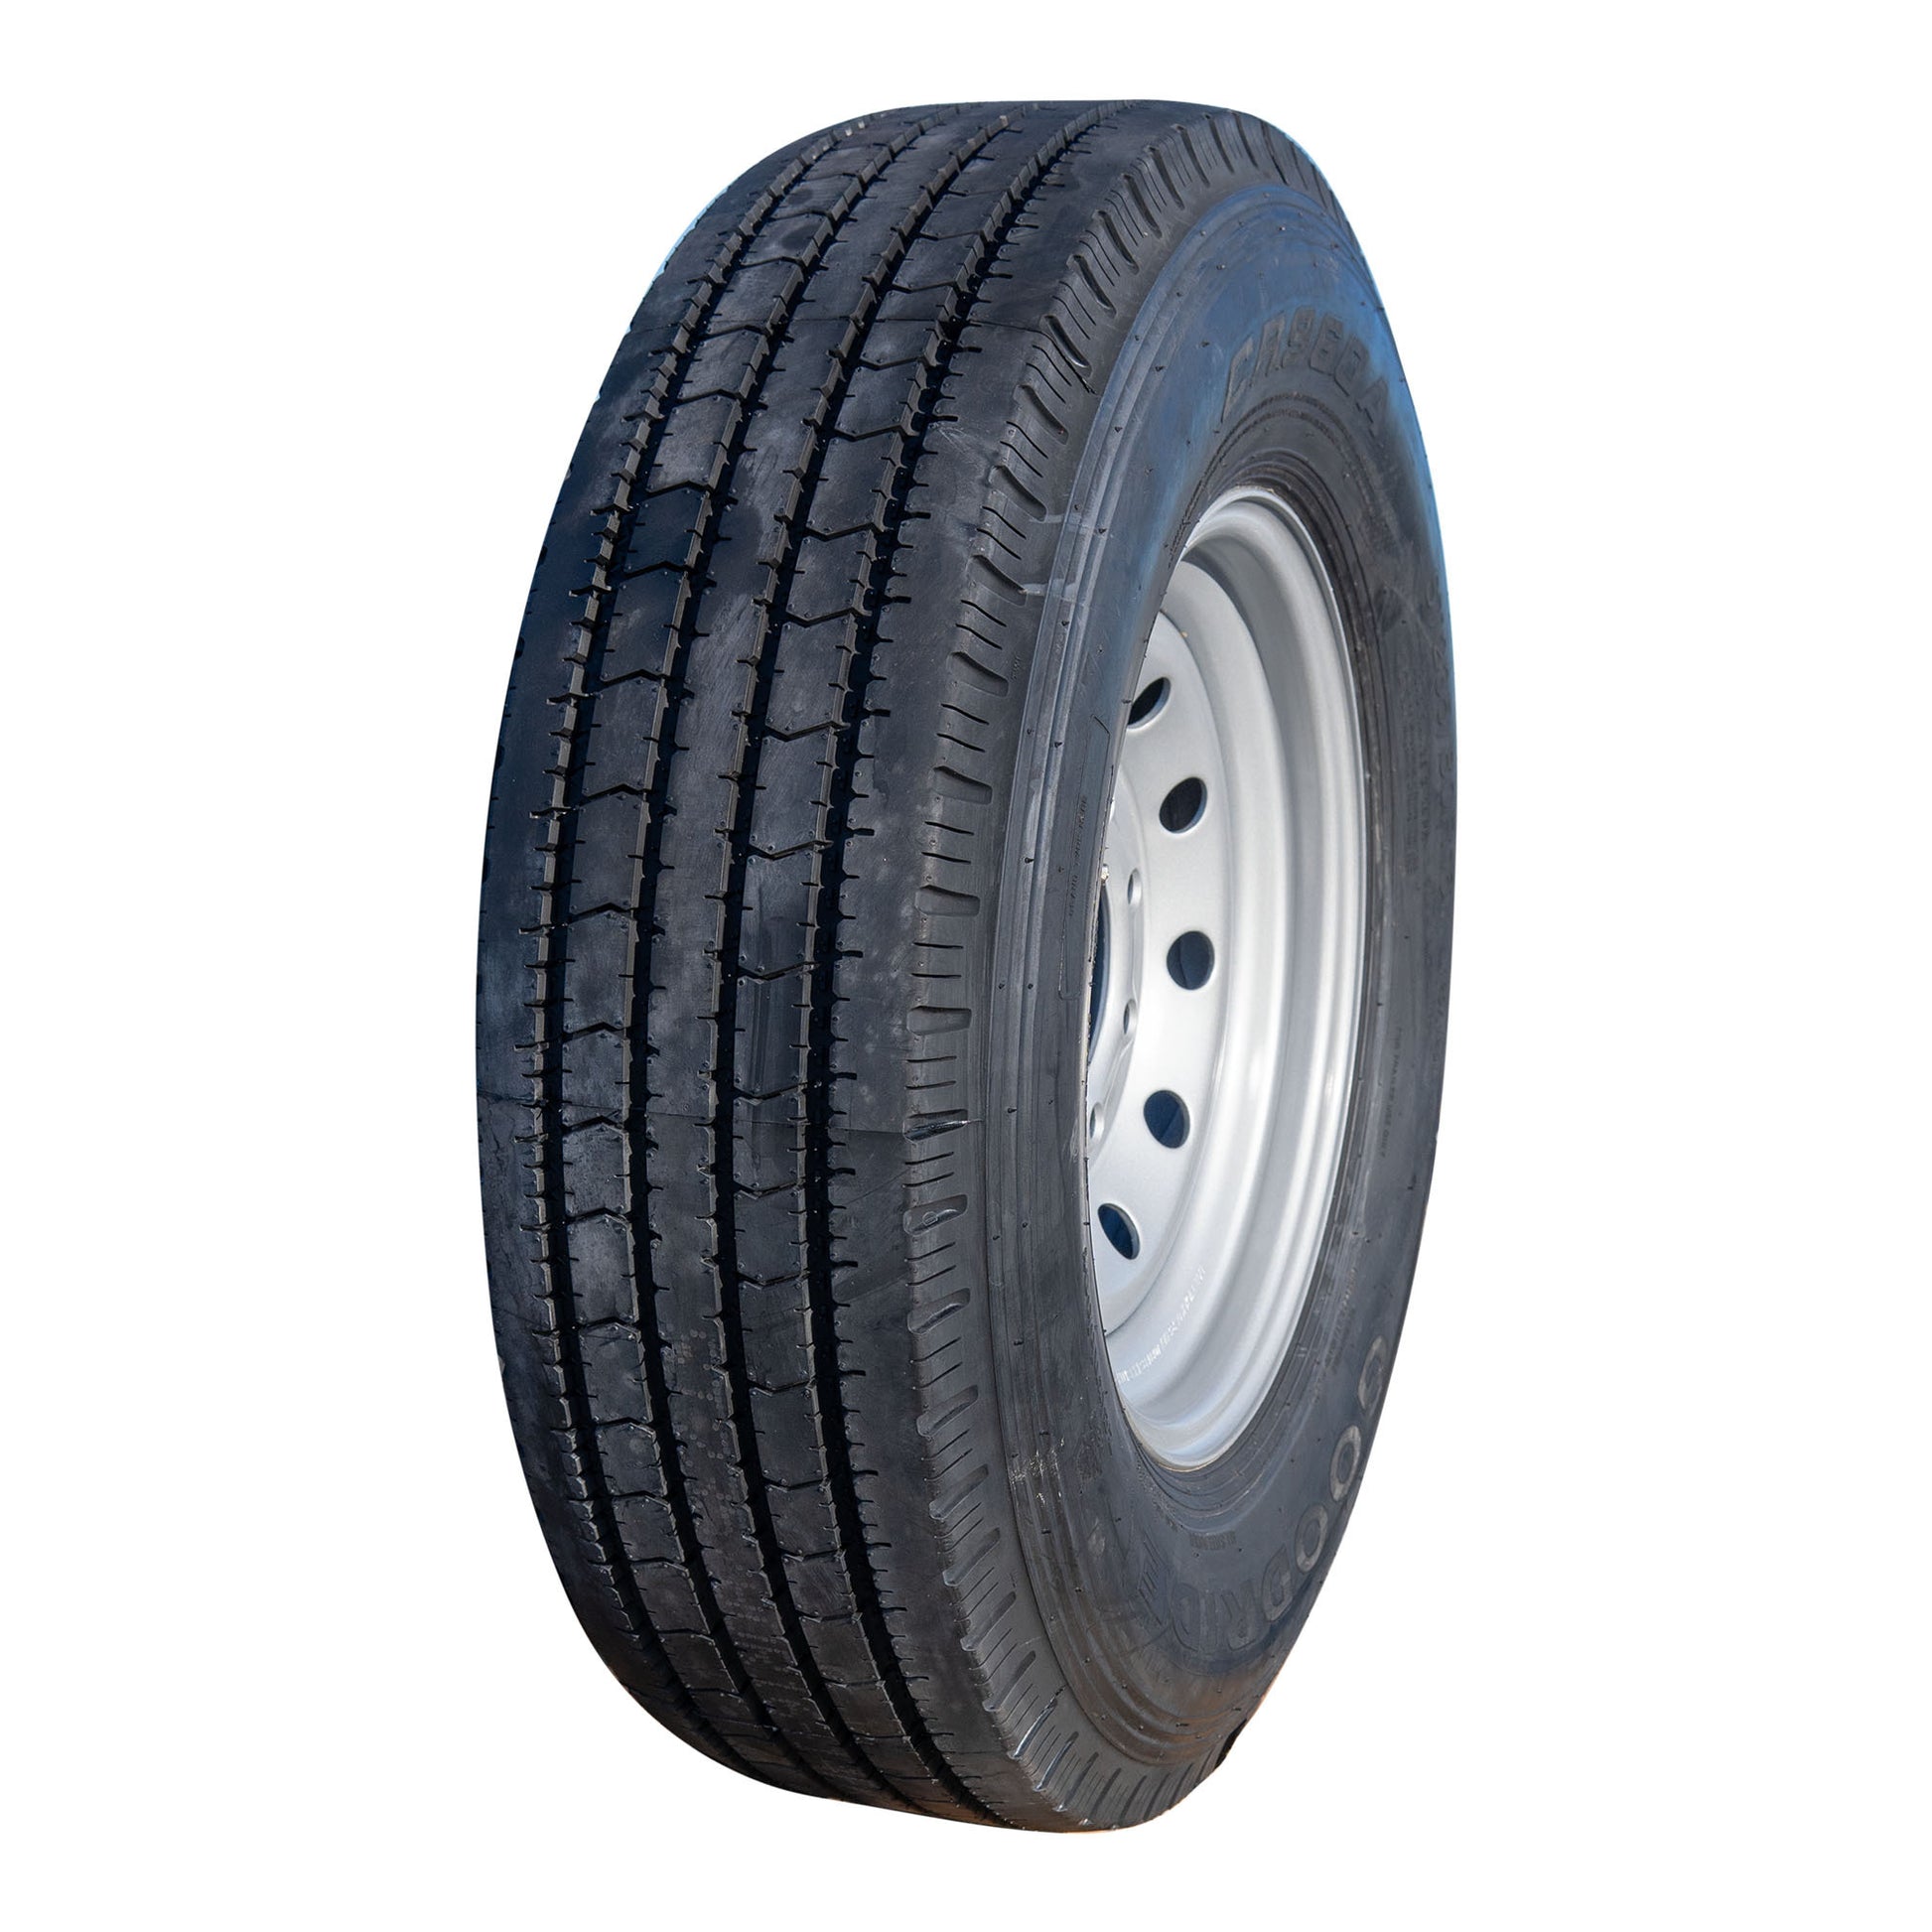 Goodride 16" 14 ply Radial Trailer Tire & Wheel - ST 235/80 R16 8 Lug (Silver Mod) - The Trailer Parts Outlet